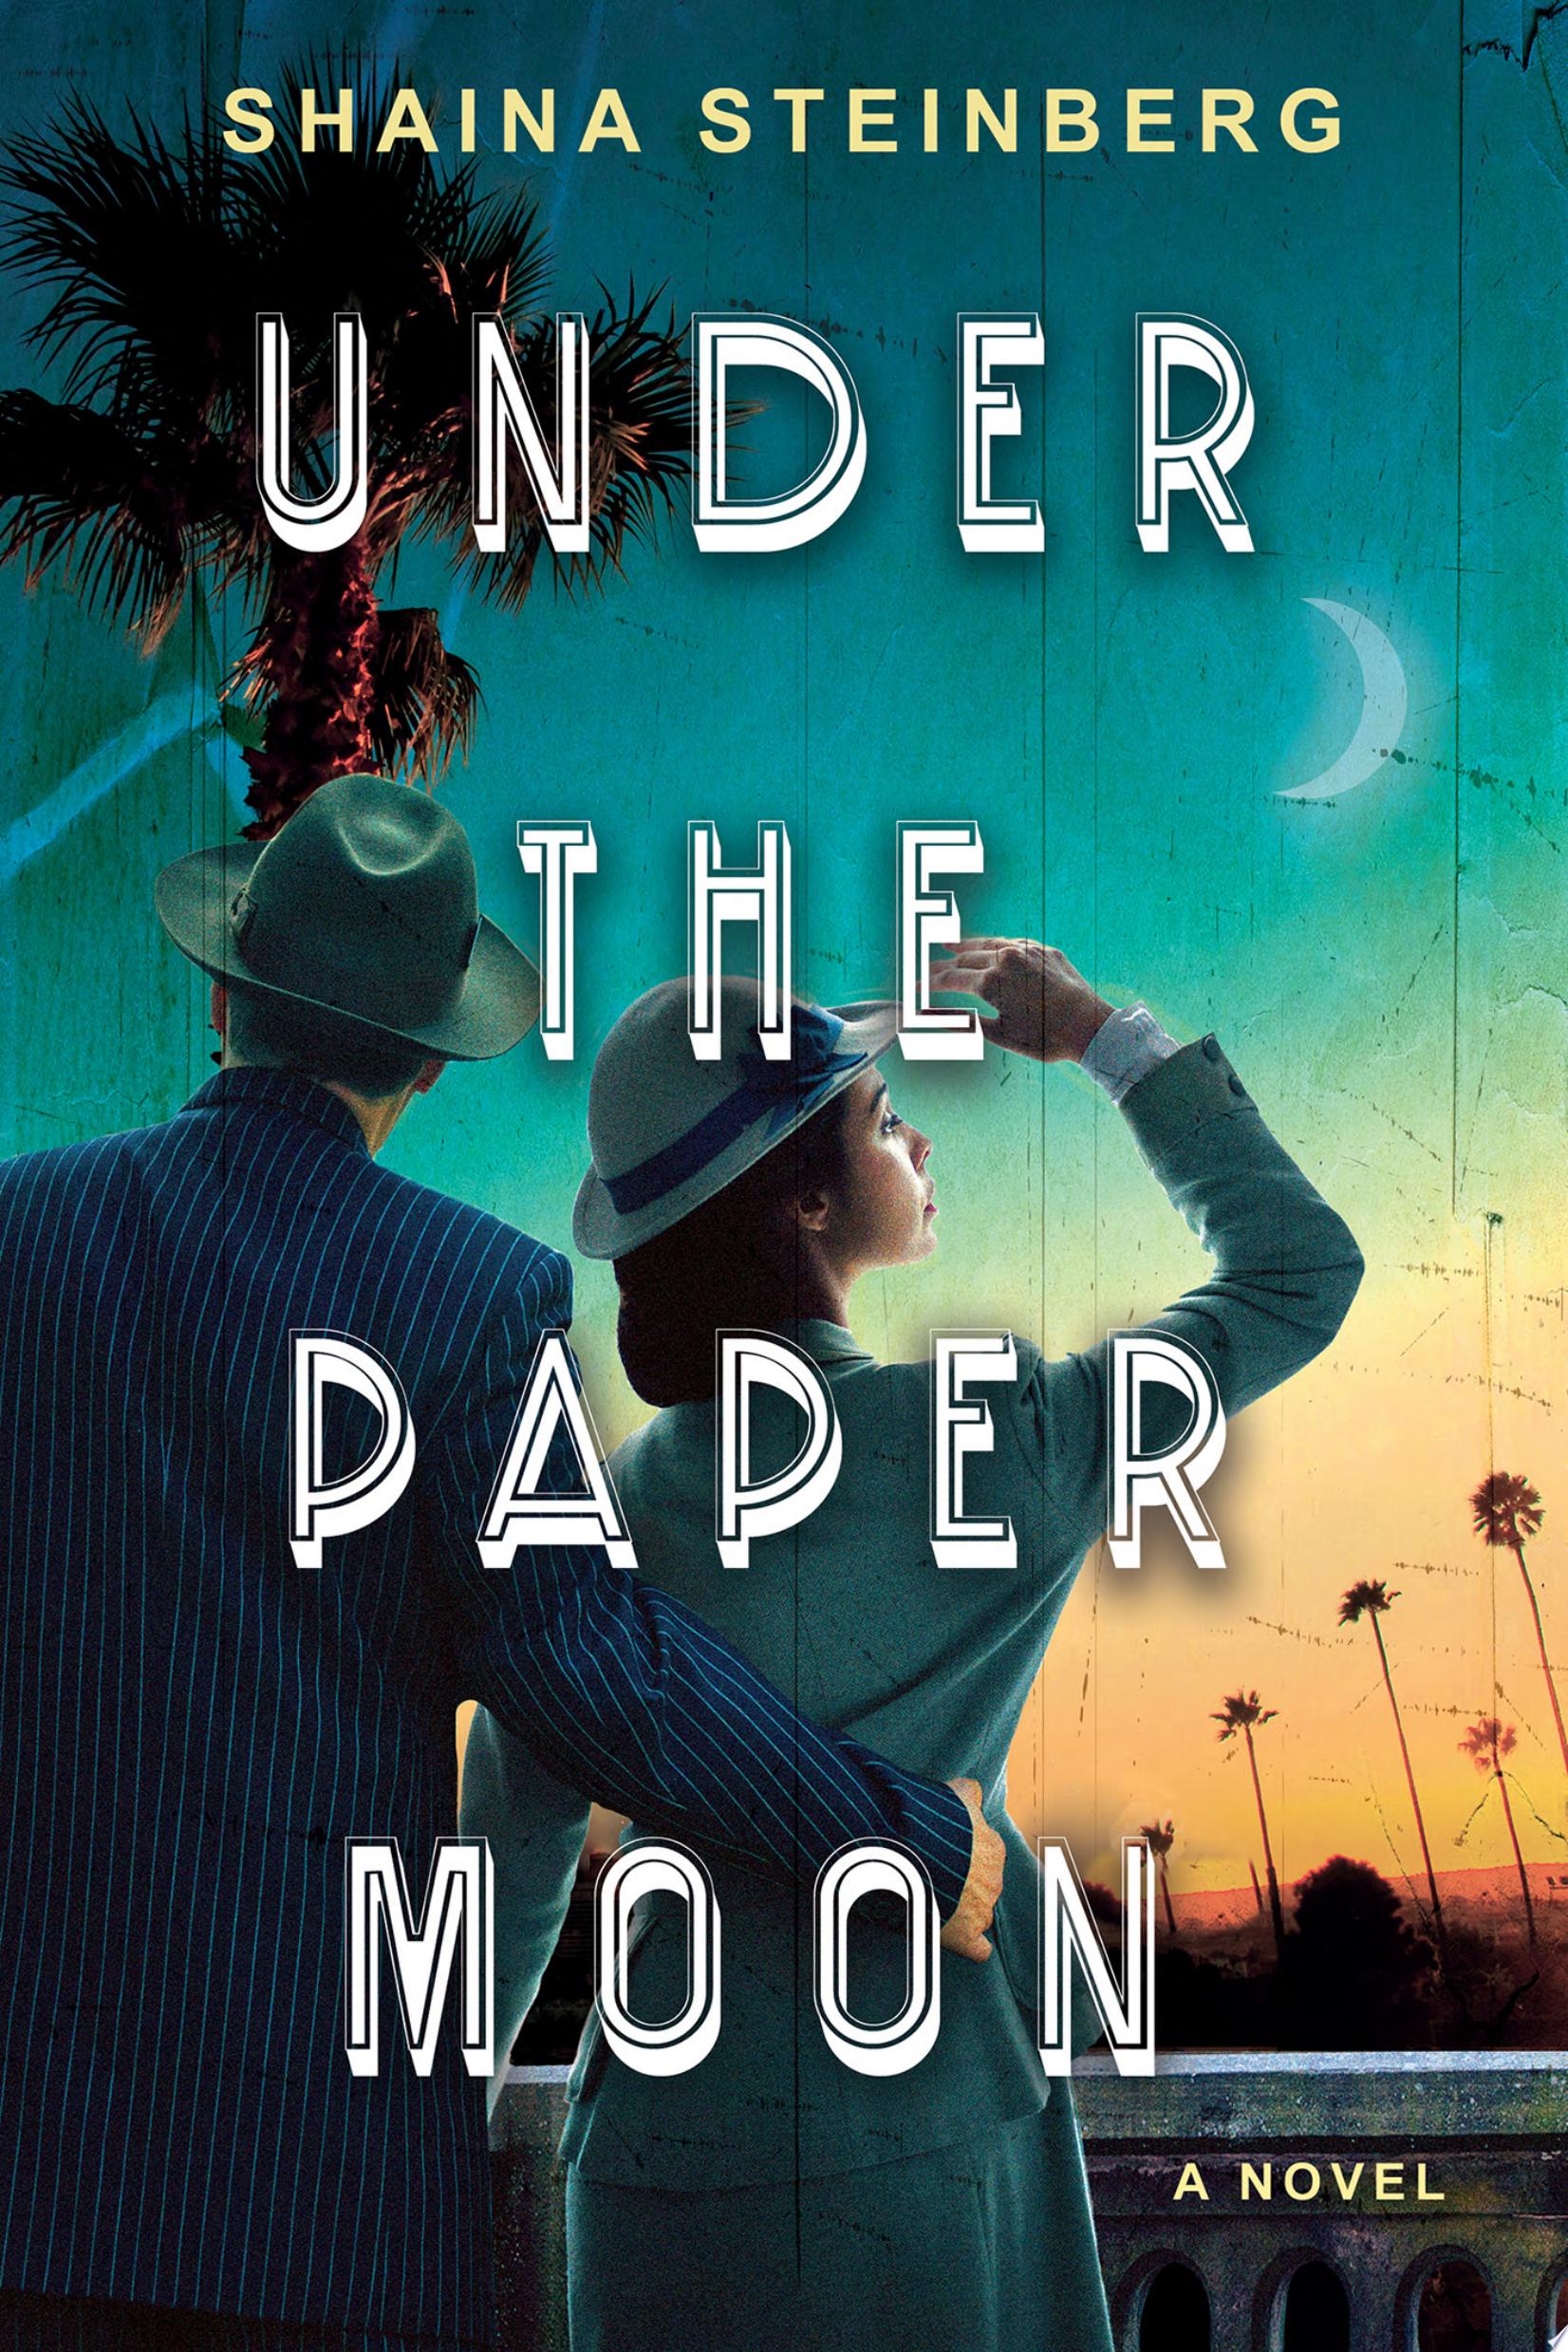 Image for "Under the Paper Moon" by Shaina Steinberg